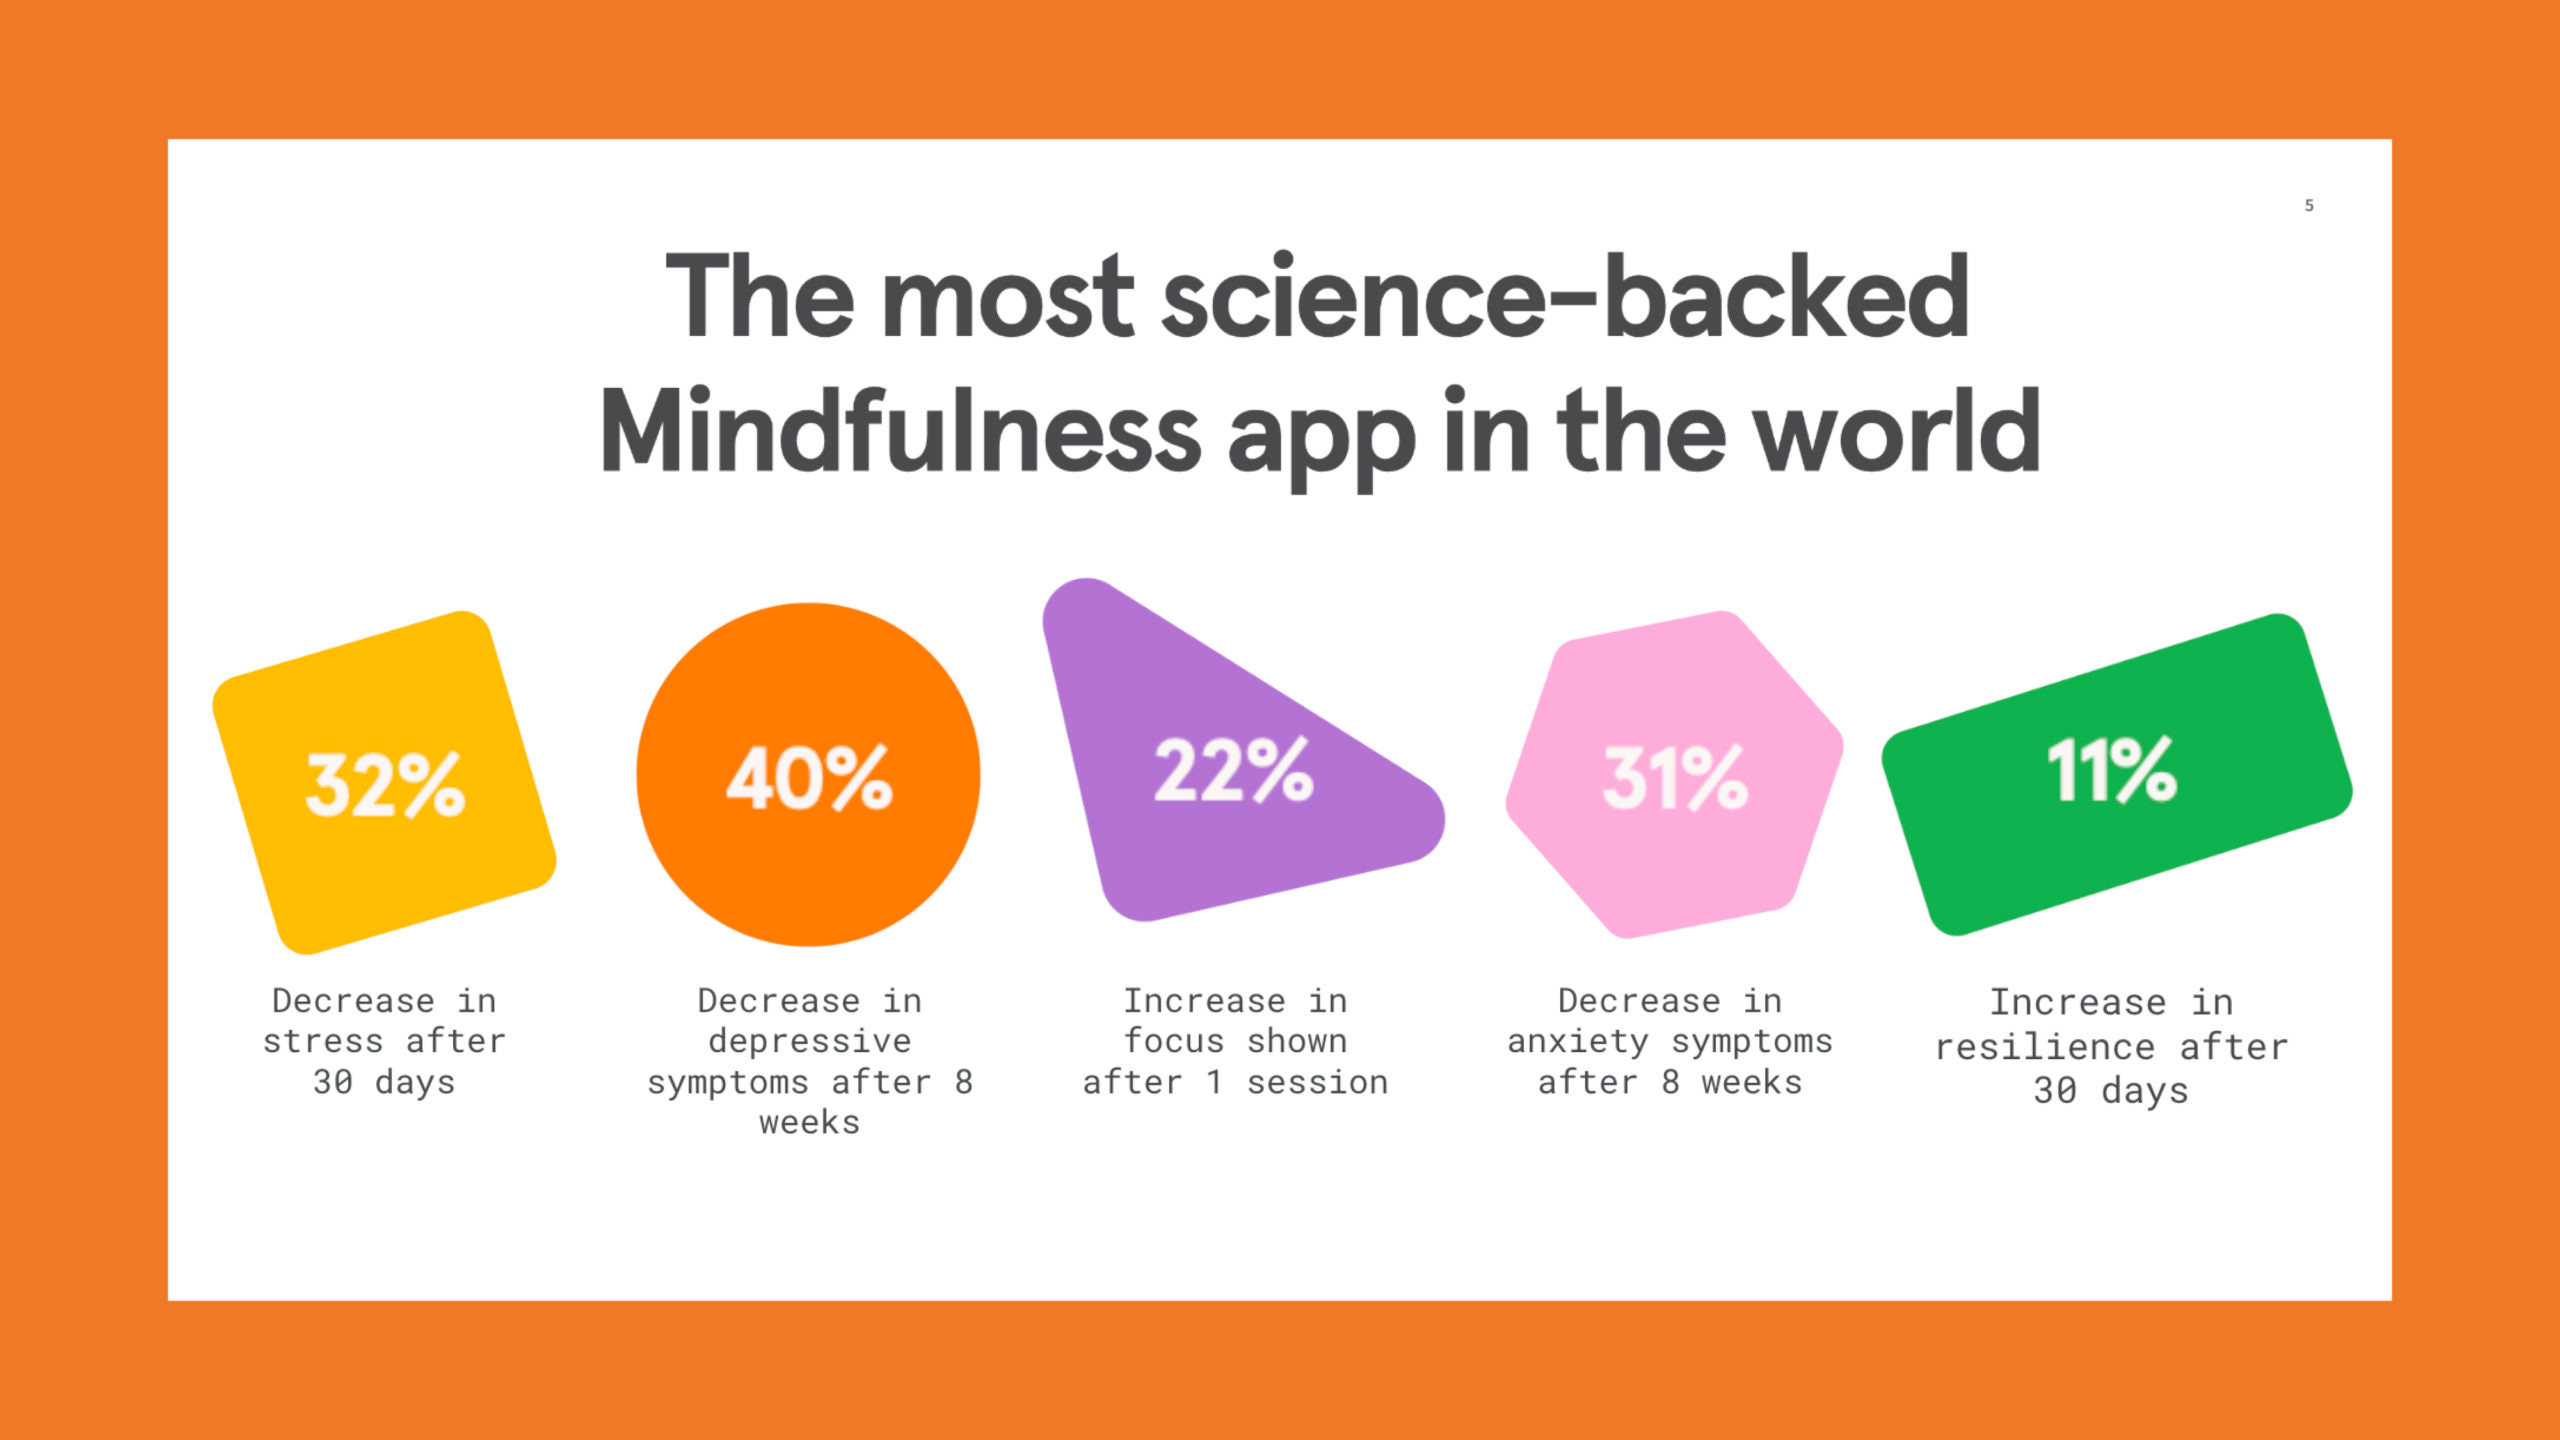 Meditation apps might calm you – but miss the point of Buddhist mindfulness